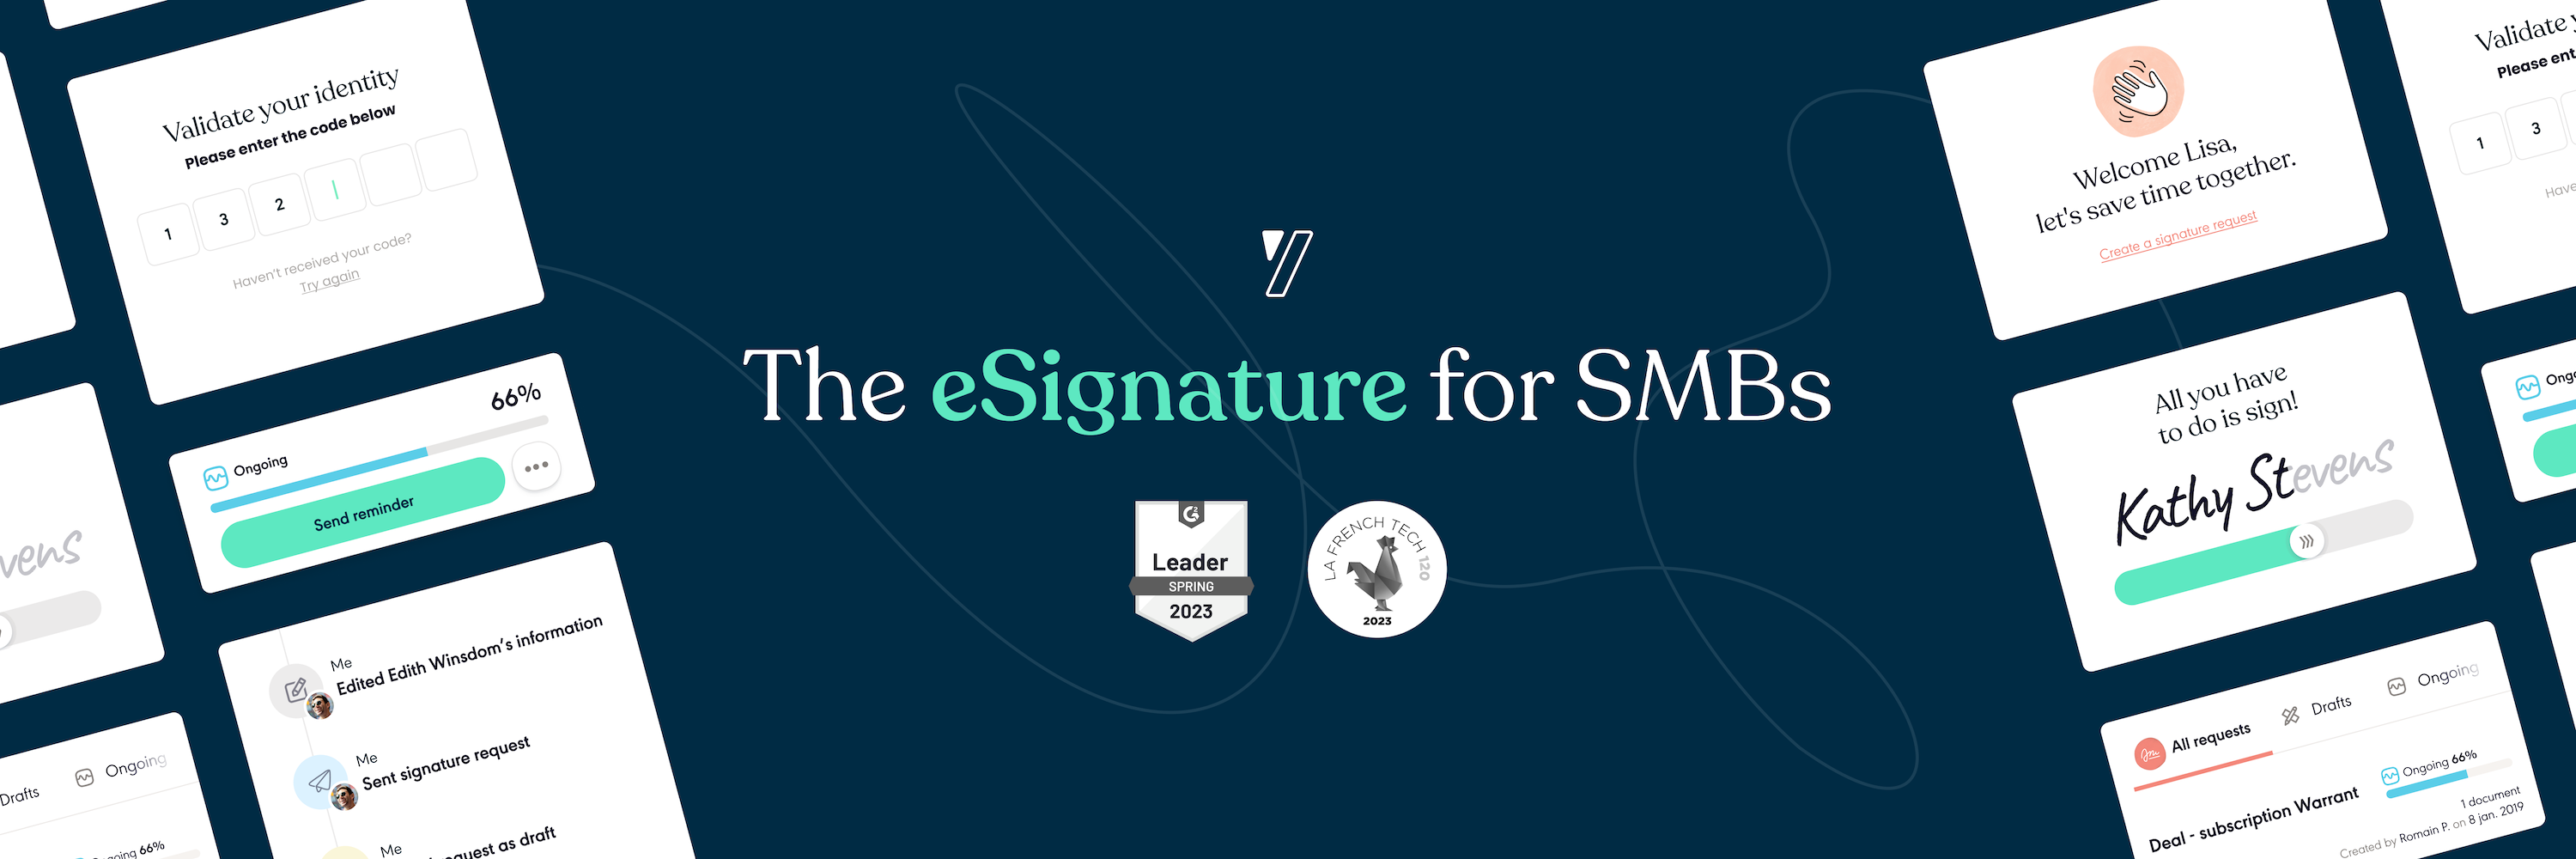 Review Yousign: The eSignature designed for SMBs - Appvizer